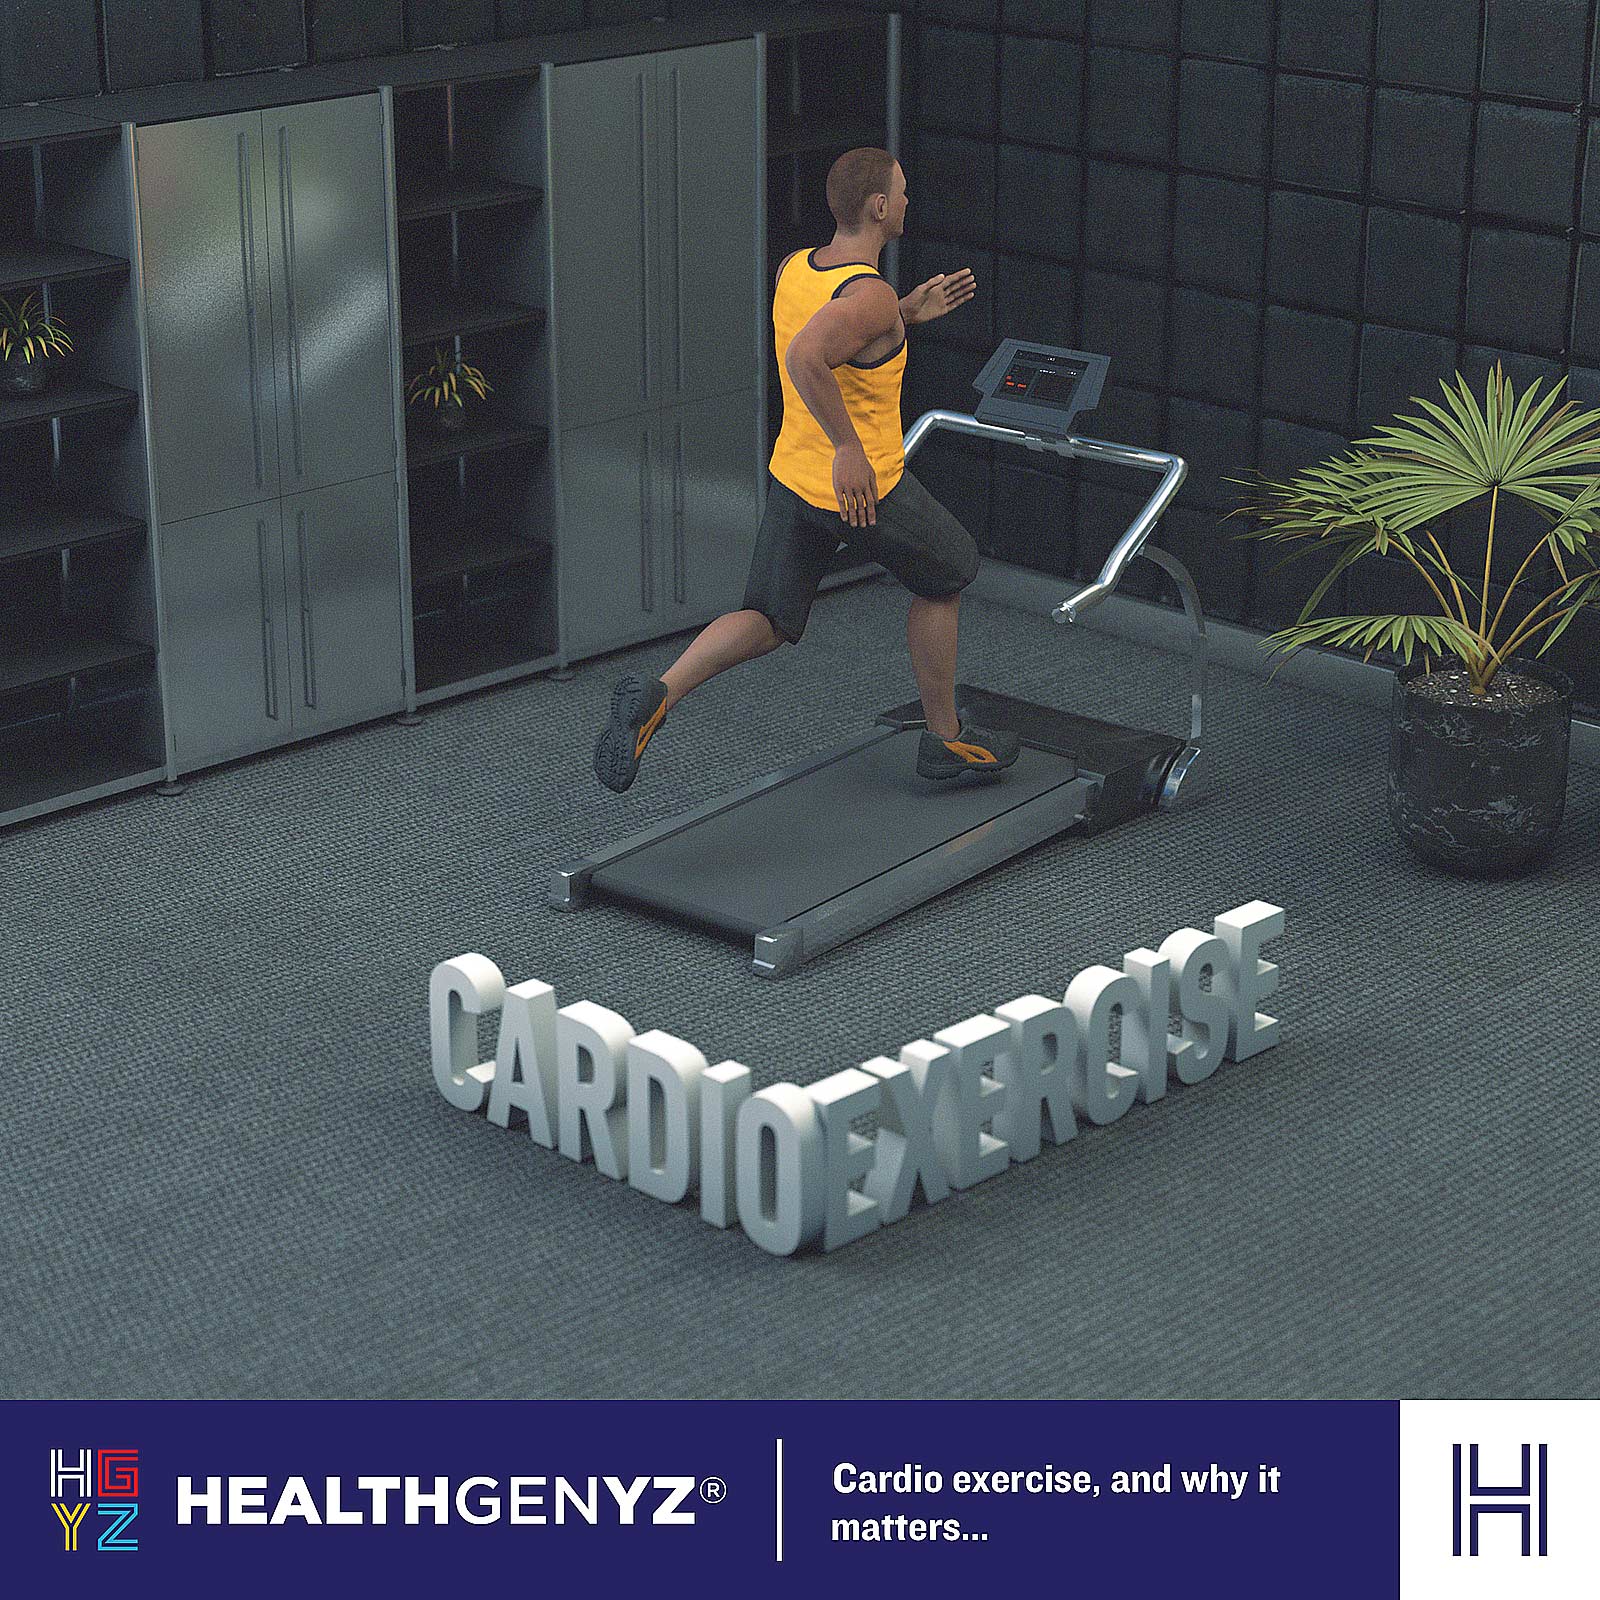 HealthGenYZ category content; a 3D model of a person in a yellow tank top & black shorts running on a treadmill in a swank gym with low-pile carpet and black tiled walls, with a dark-marble pot with a plant in it, and 3D extruded text on the carpet that says, "Cardio Exercise".